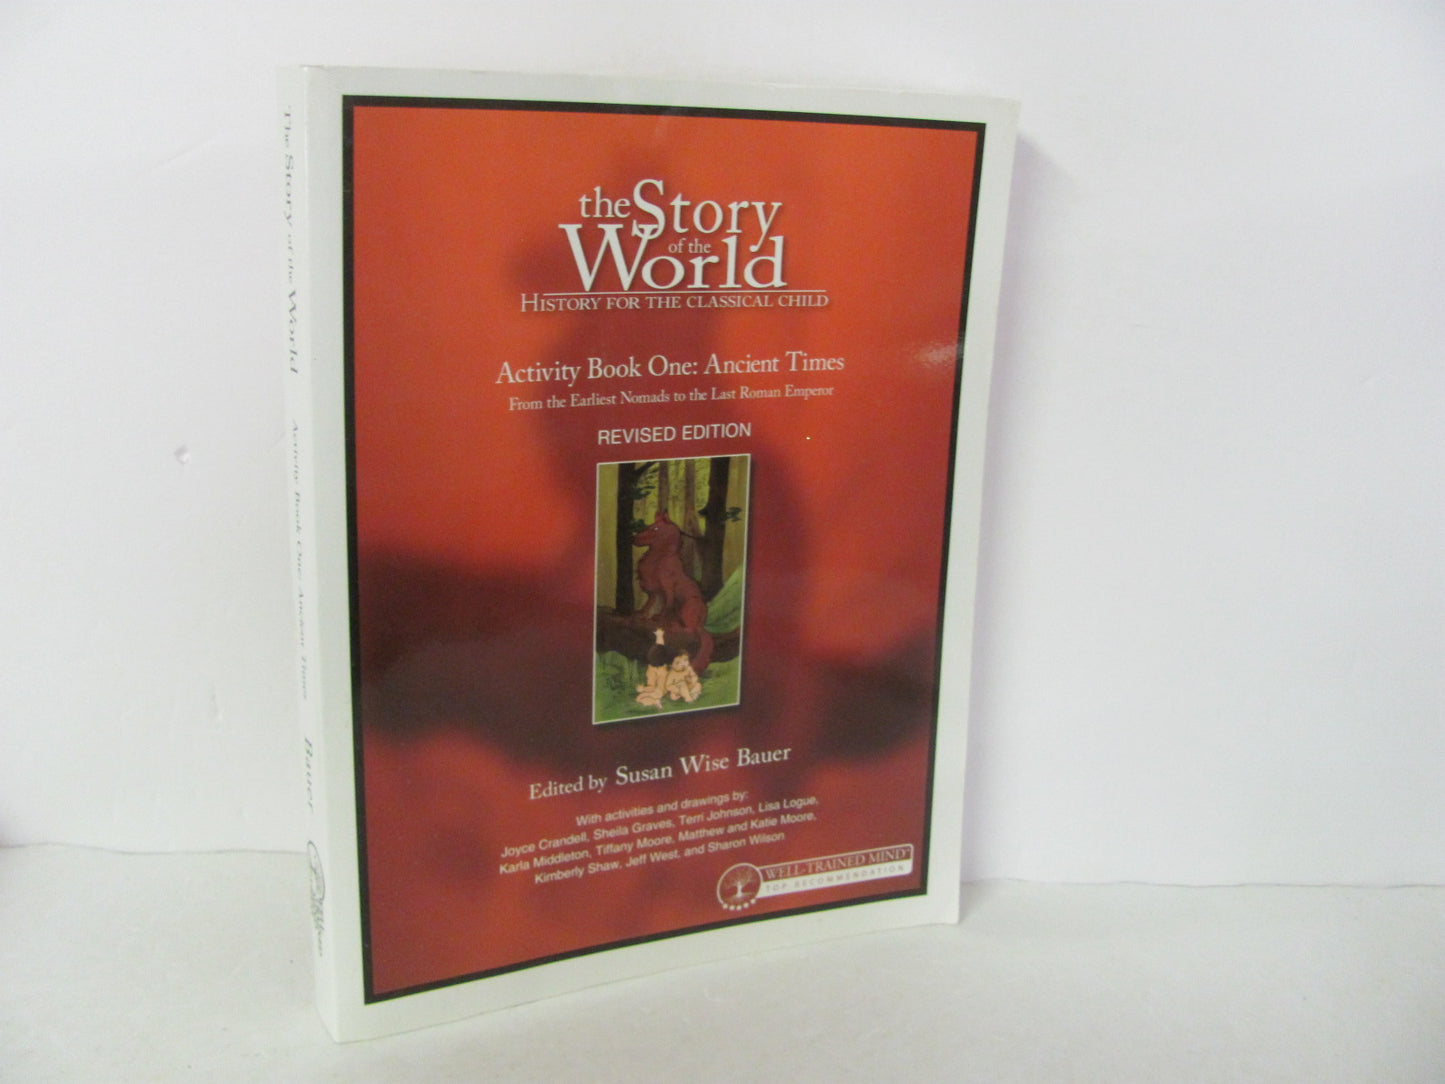 The Story of the World Vol 1 Well Trained Mind Press Bauer History Textbooks